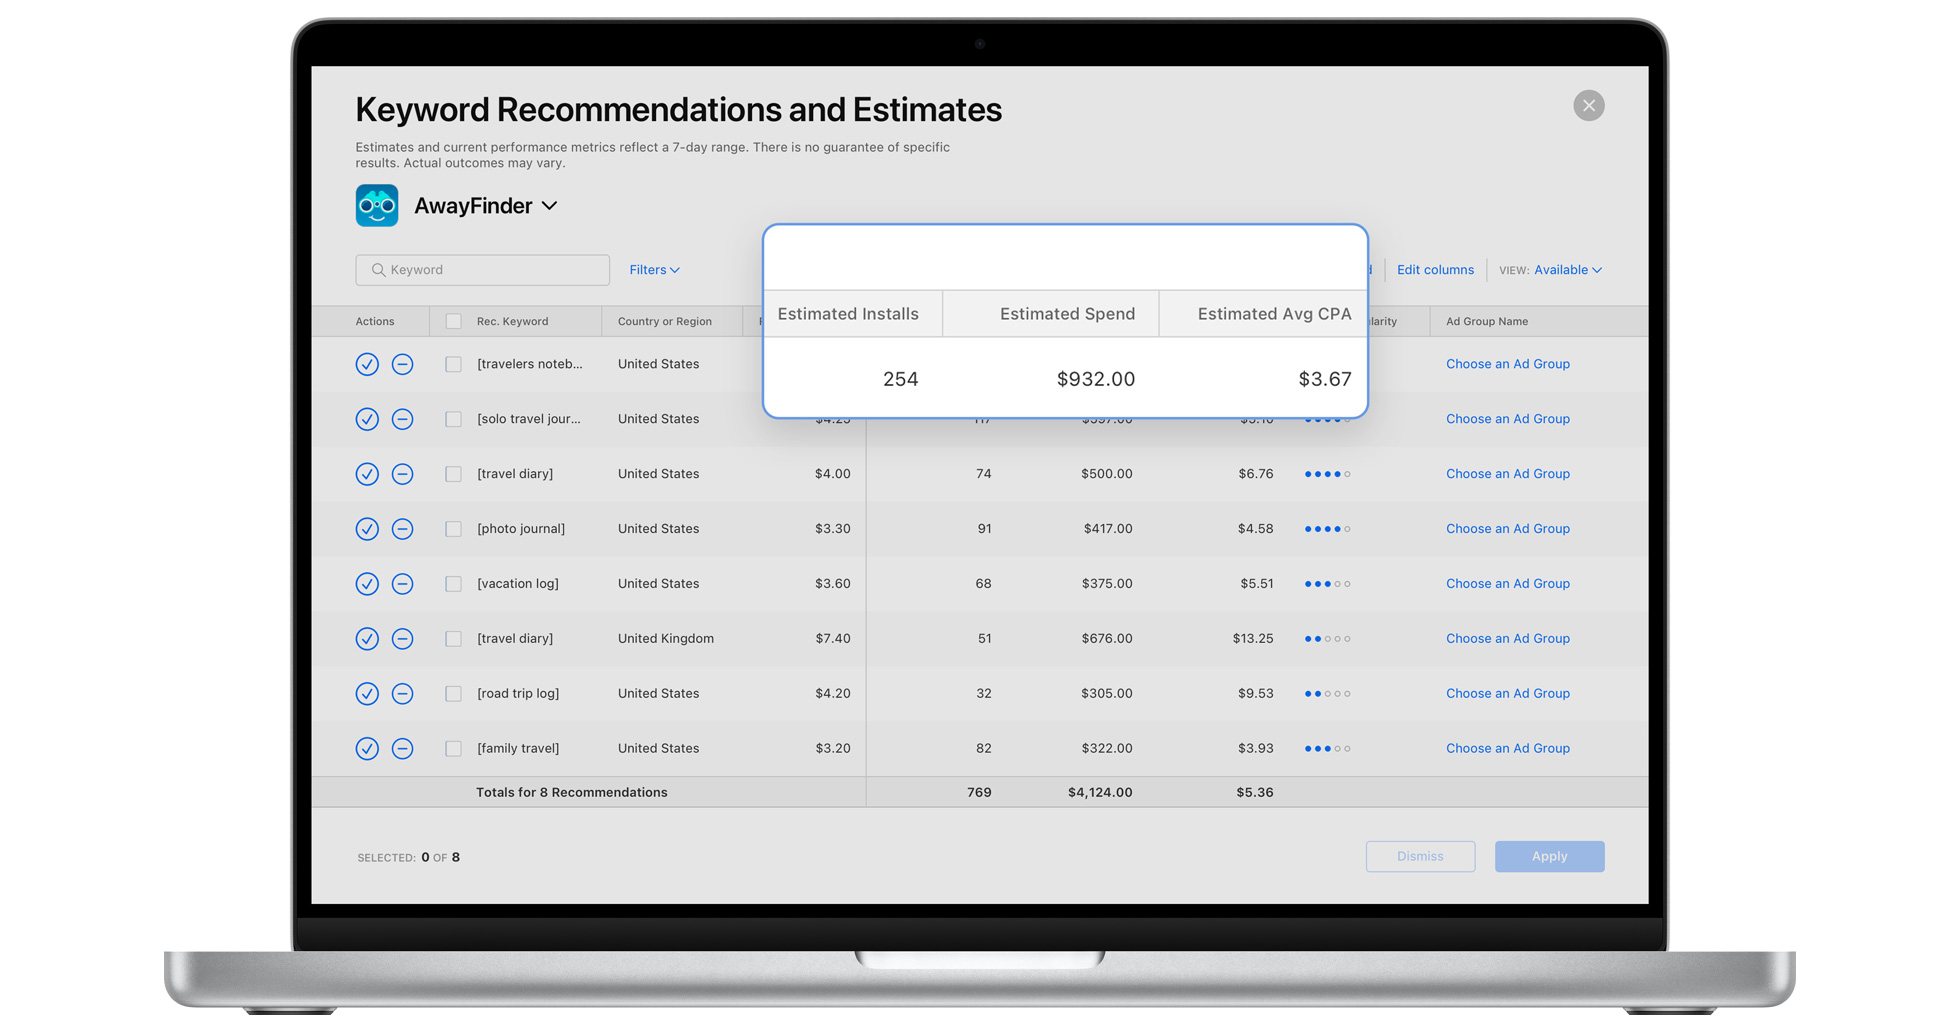 The Keyword Recommendations page in Apple Search Ads Advanced shows the recommendations table organized by keyword, recommended max CPT bid, estimated installs, estimated spend, estimated average CPA, and more.